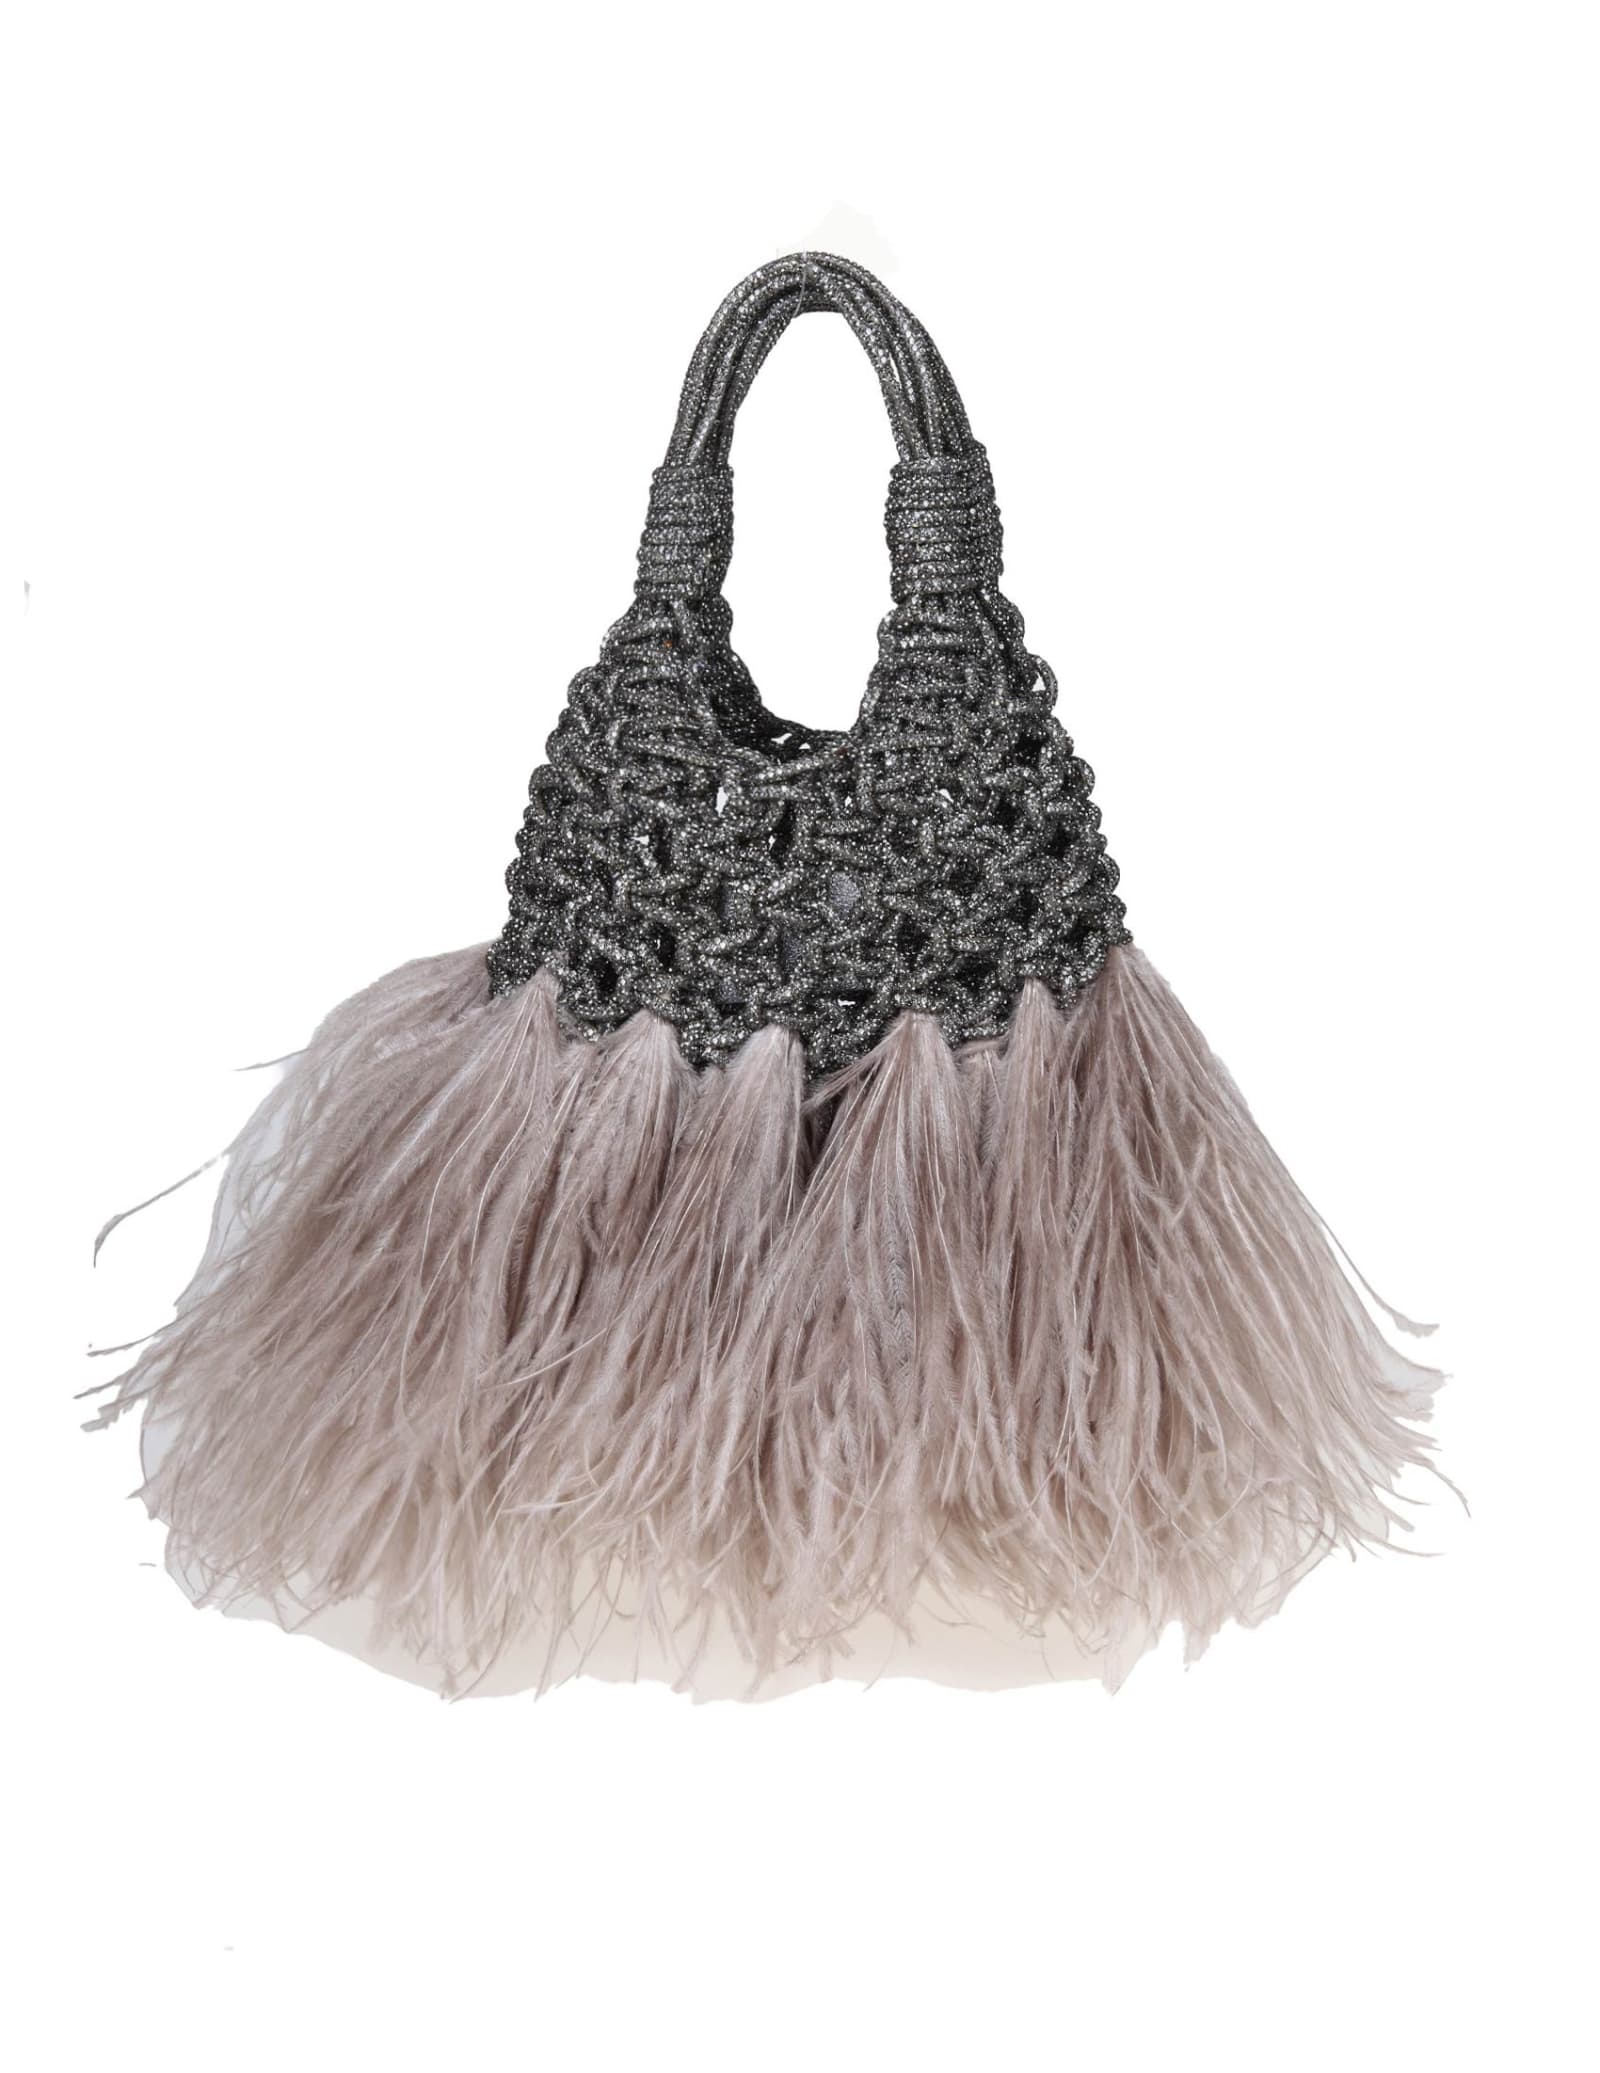 Shop Hibourama Jewel Bag Woven With Ostrich Feathers In Black